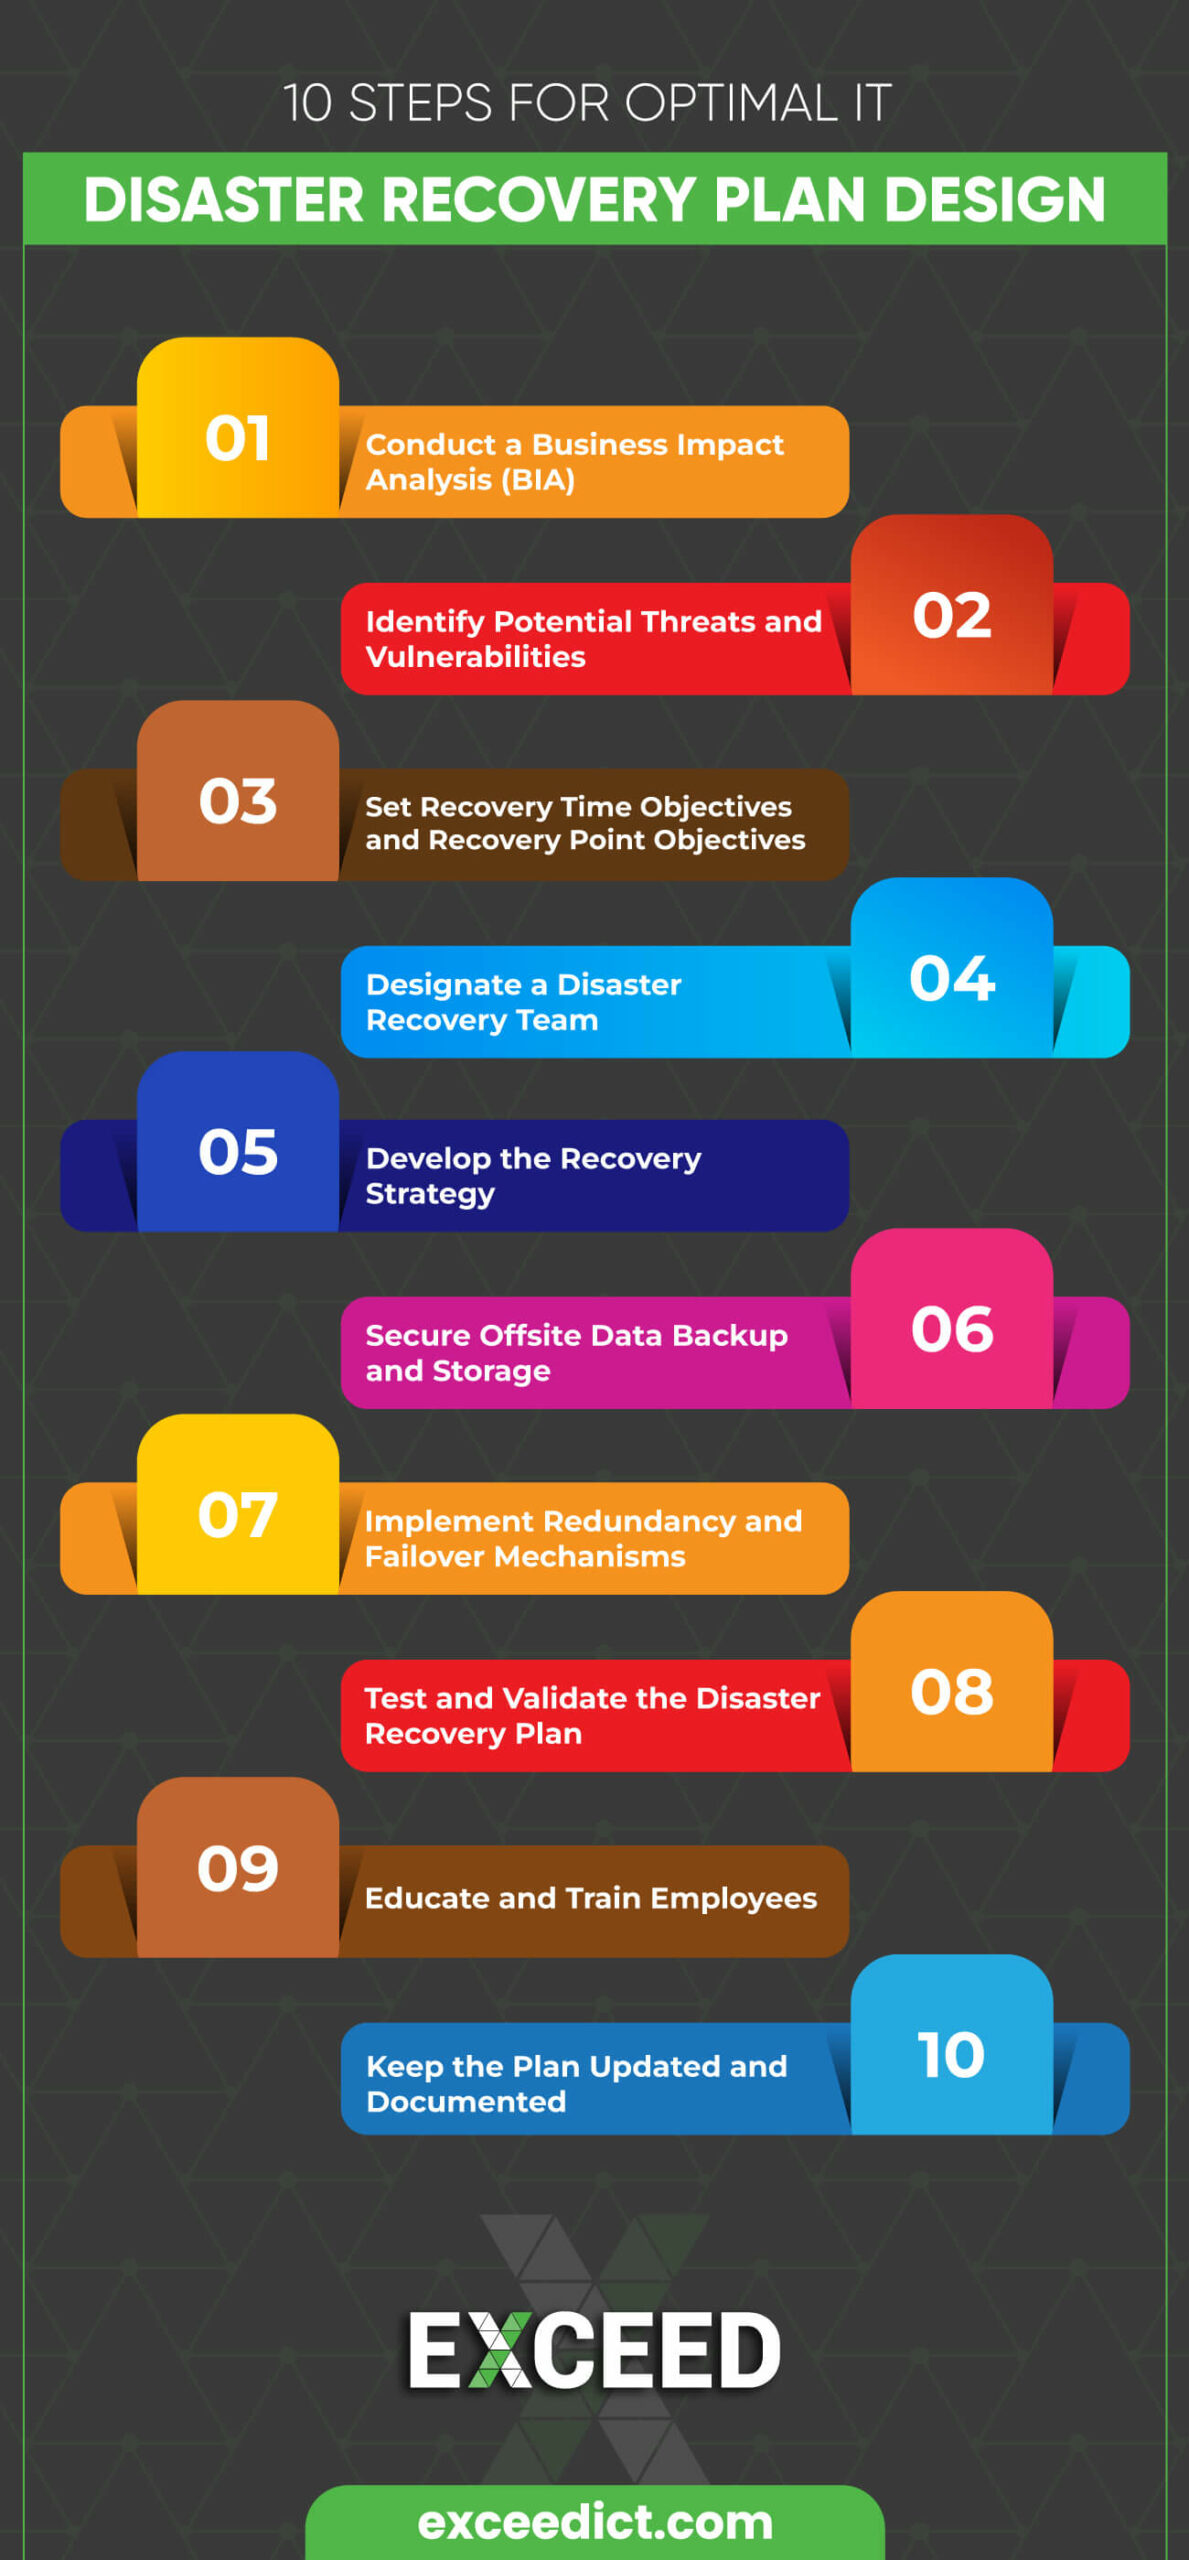 10 Steps for Optimal IT Disaster Recovery Plan Design